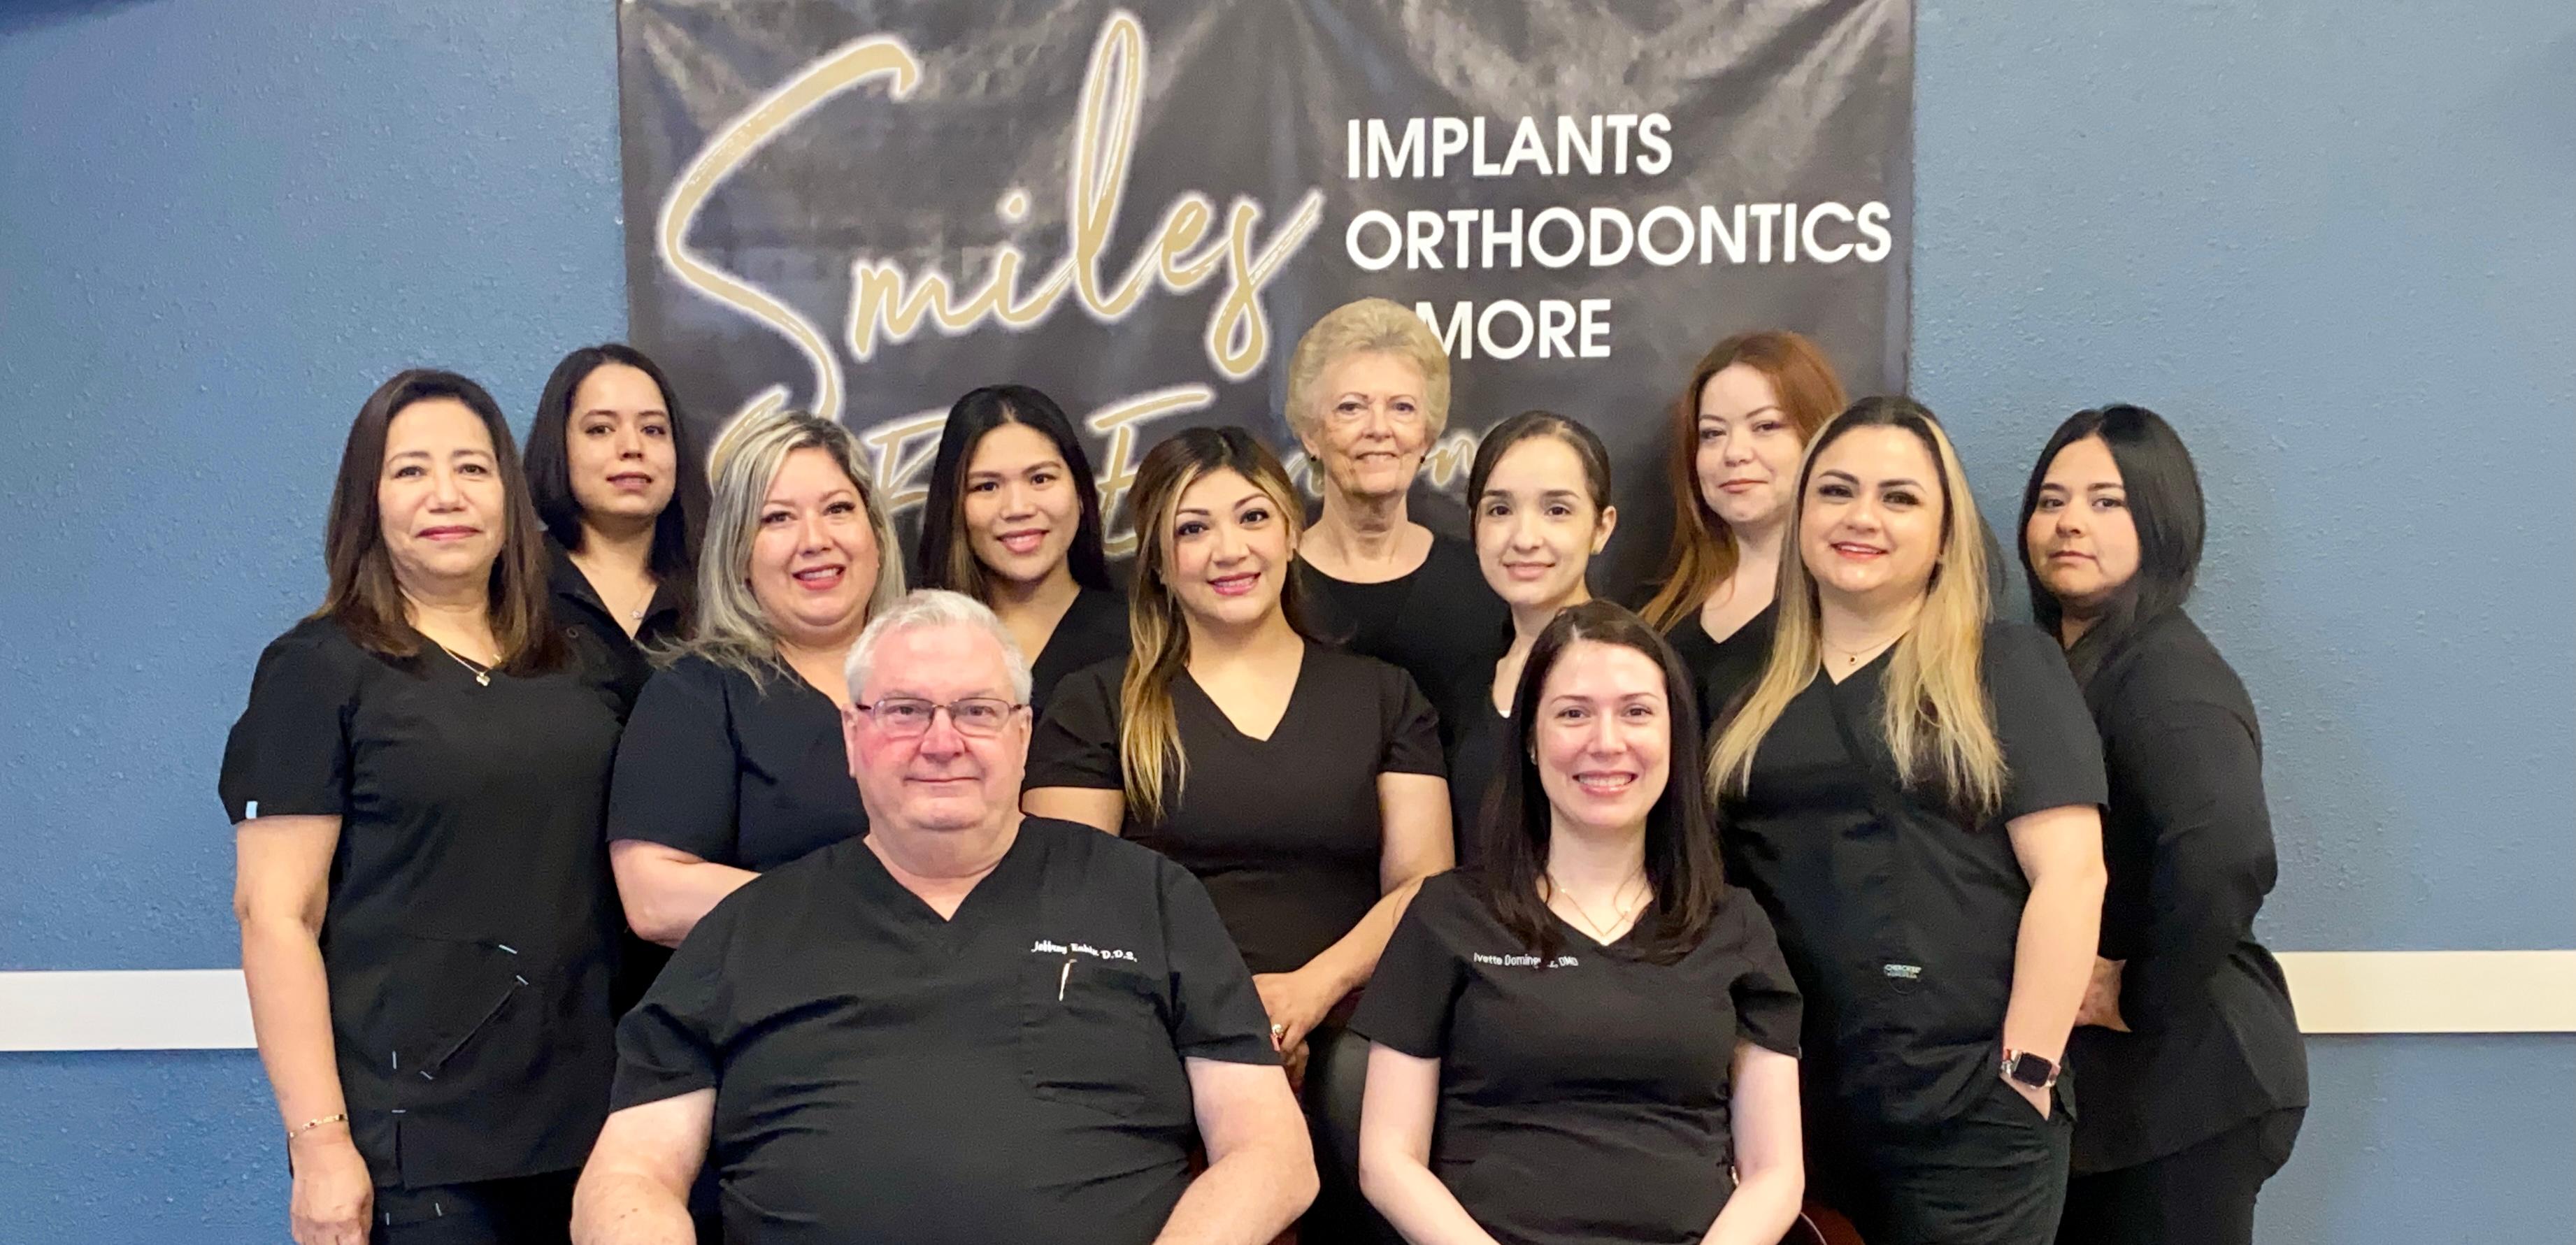 Meet Dr. Eakin and his amazing dental team at Castle Dental & Implants. All of your expert dental needs under one roof- cleanings, fillings, check-ups, extractions, dental implants, and more! Book your appointment today!